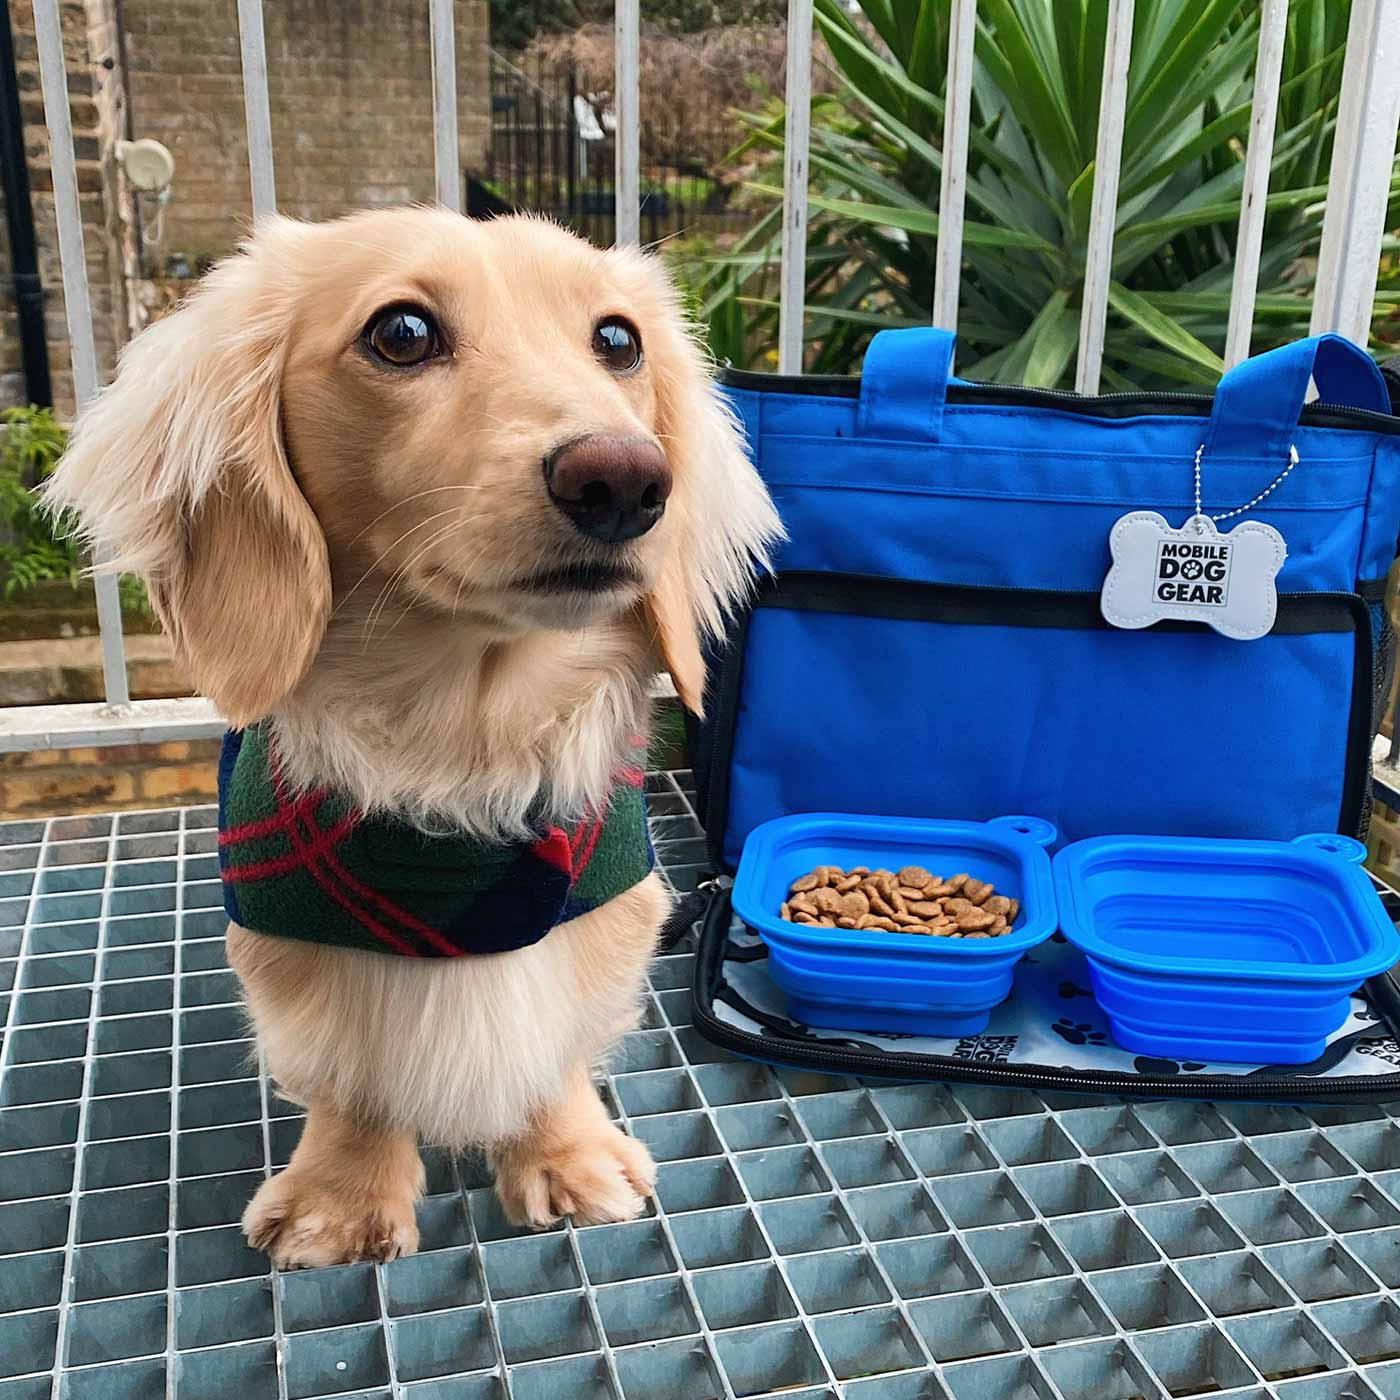 Discover, Mobile Dog Gear Week Away Bag, in Blue. The Perfect Away Bag for any Pet Parent, Featuring dividers to stack food and built in waste bag dispenser. Also Included feeding set, collapsible silicone bowls and placemat! The Perfect Gift For travel, meets airline requirements. Available Now at Lords & Labradors US